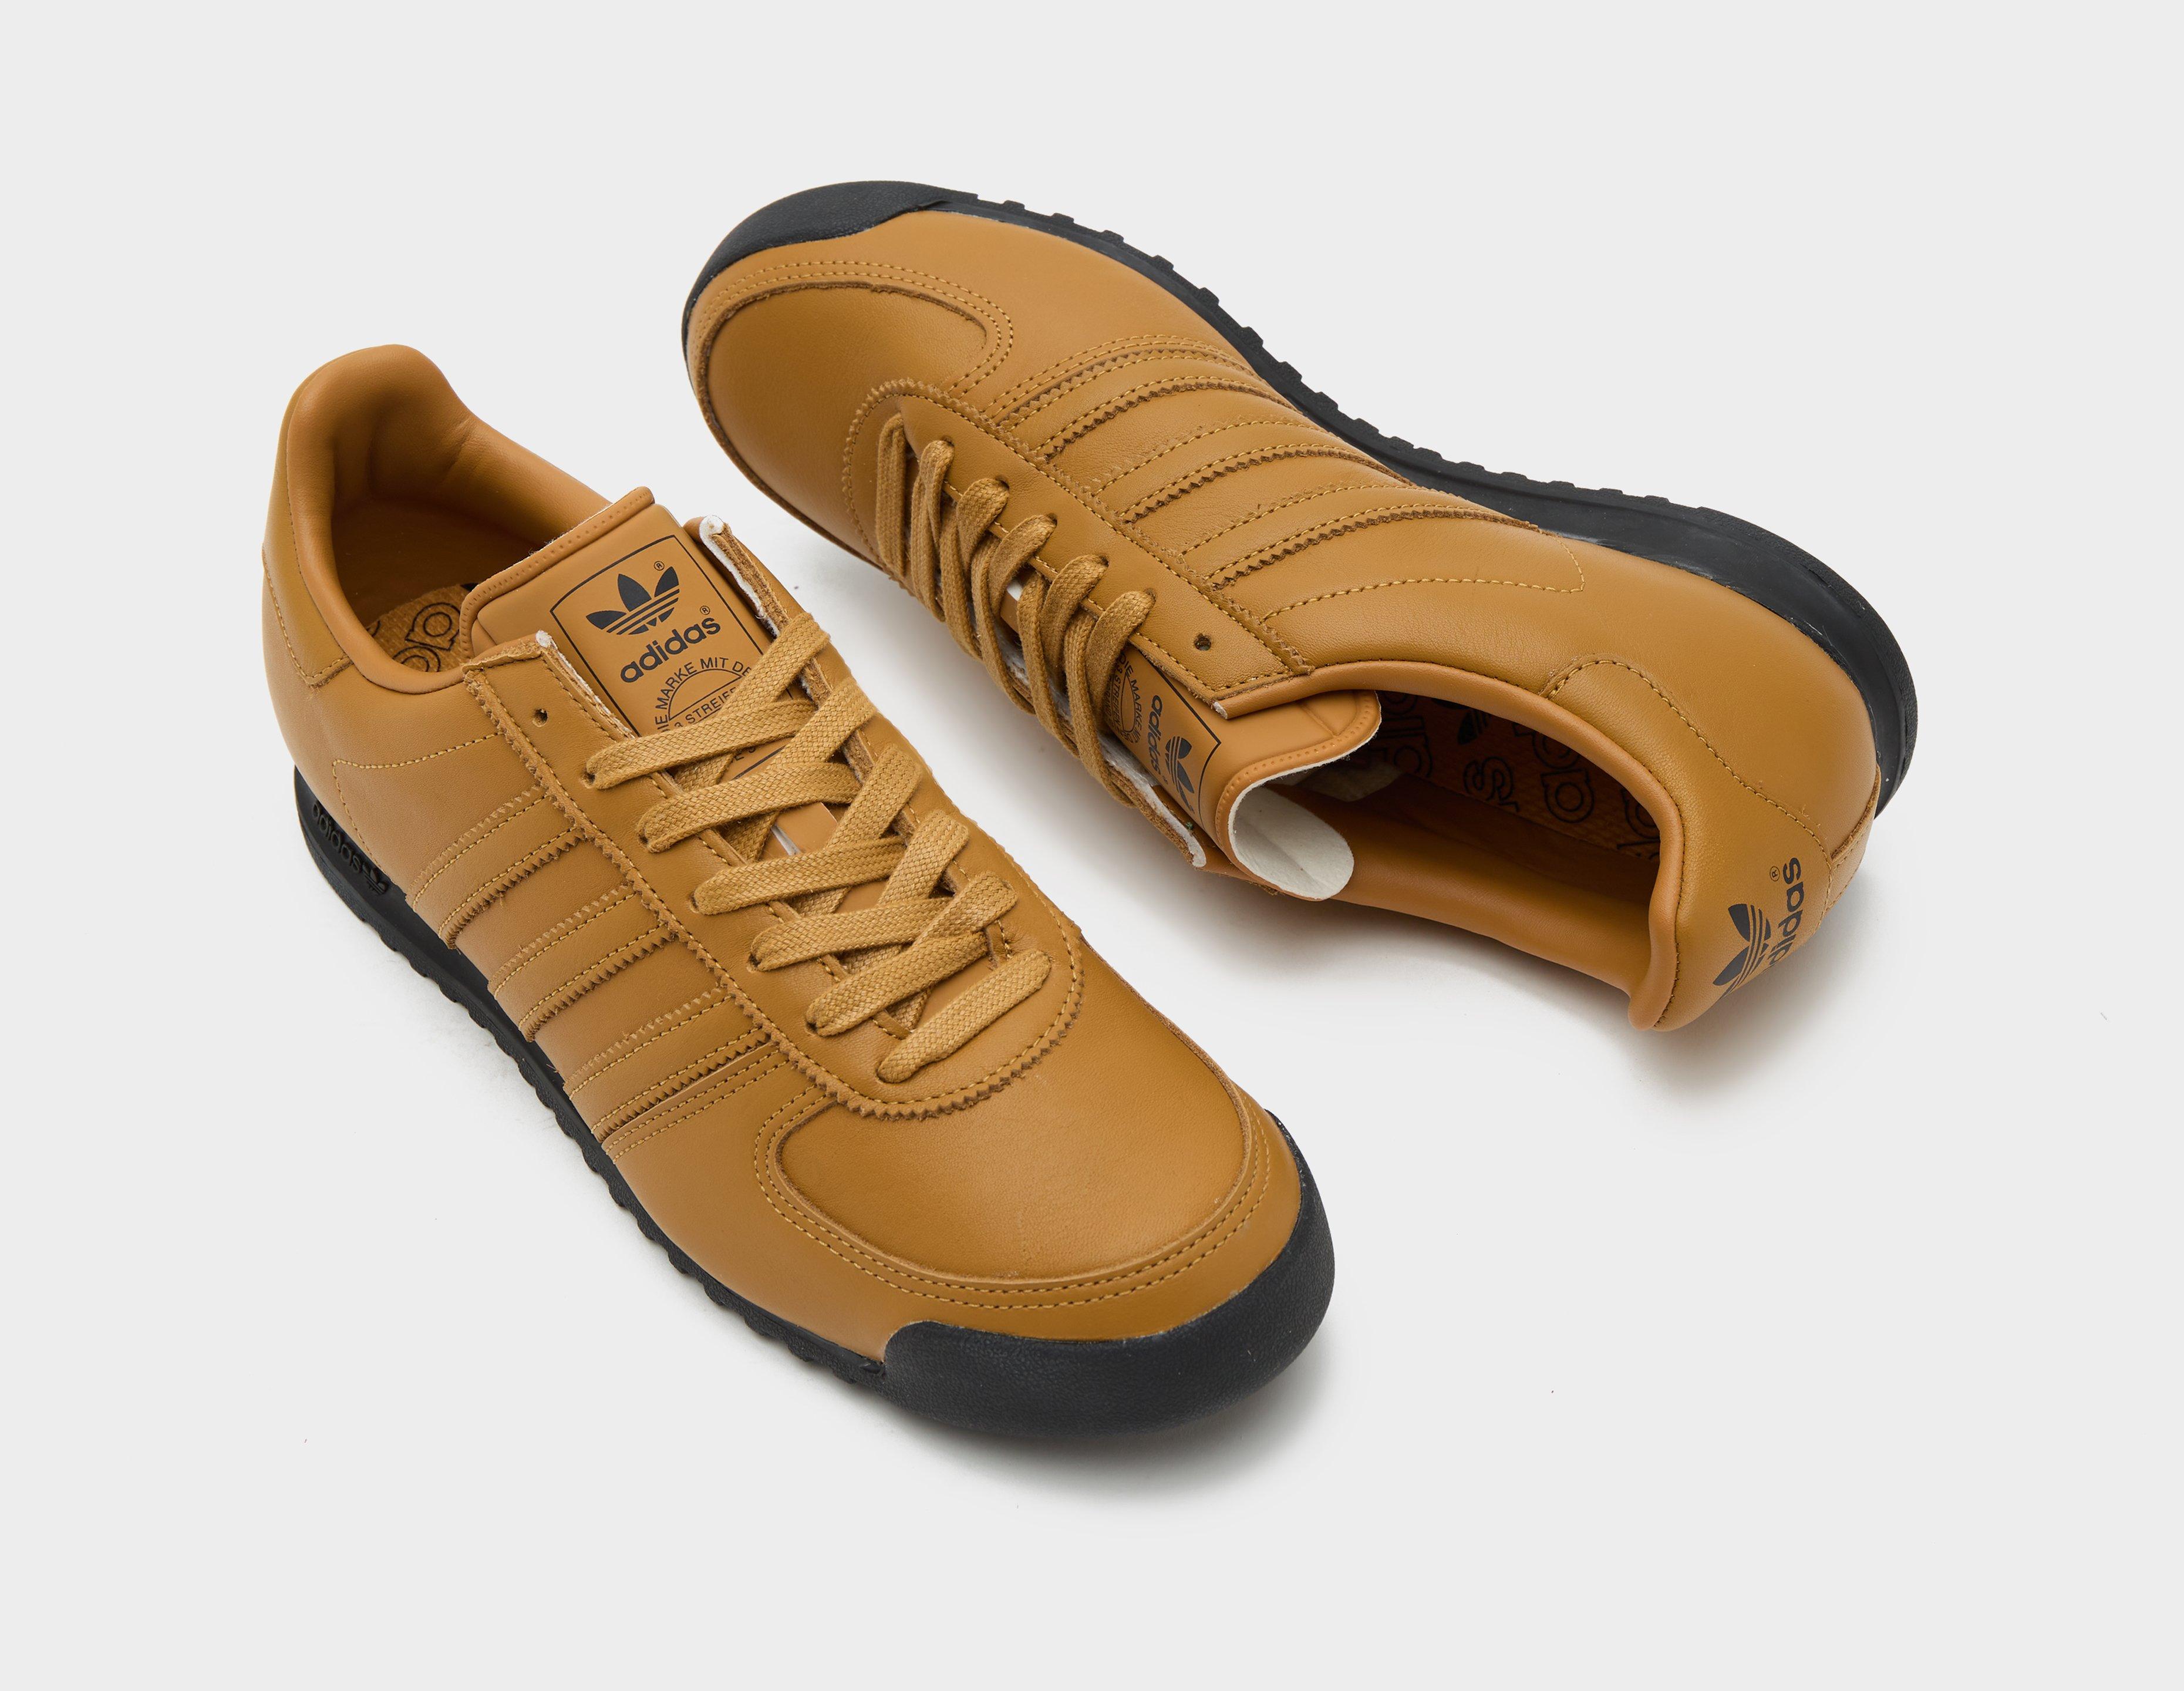 exclusive Women's | puma and dress adidas brands for women shoes sale -  Healthdesign? - Brown dress adidas Originals Archive All Team